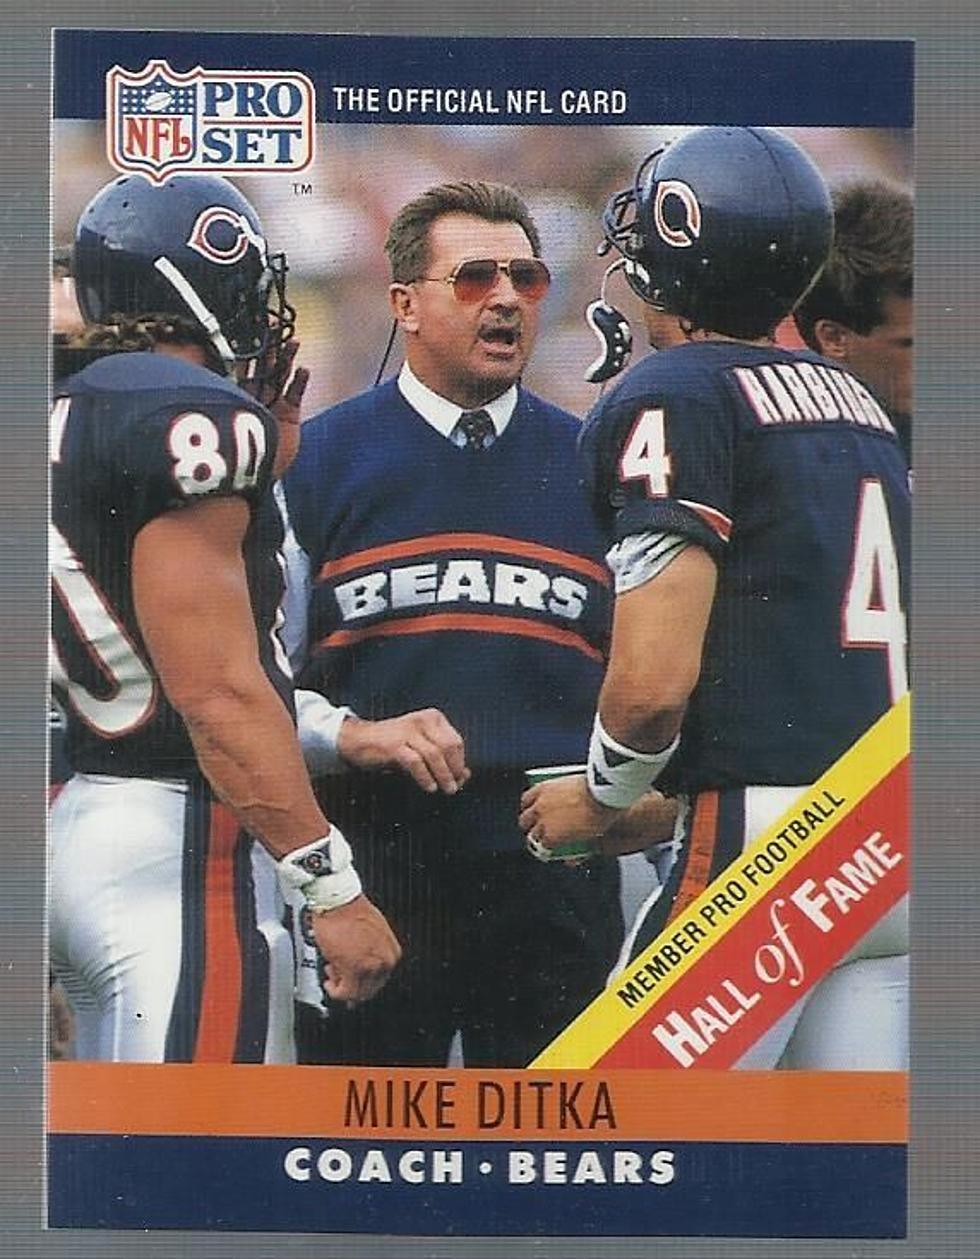 NFL Hall of Famer Mike Ditka says “No!” to Kids Playing Football